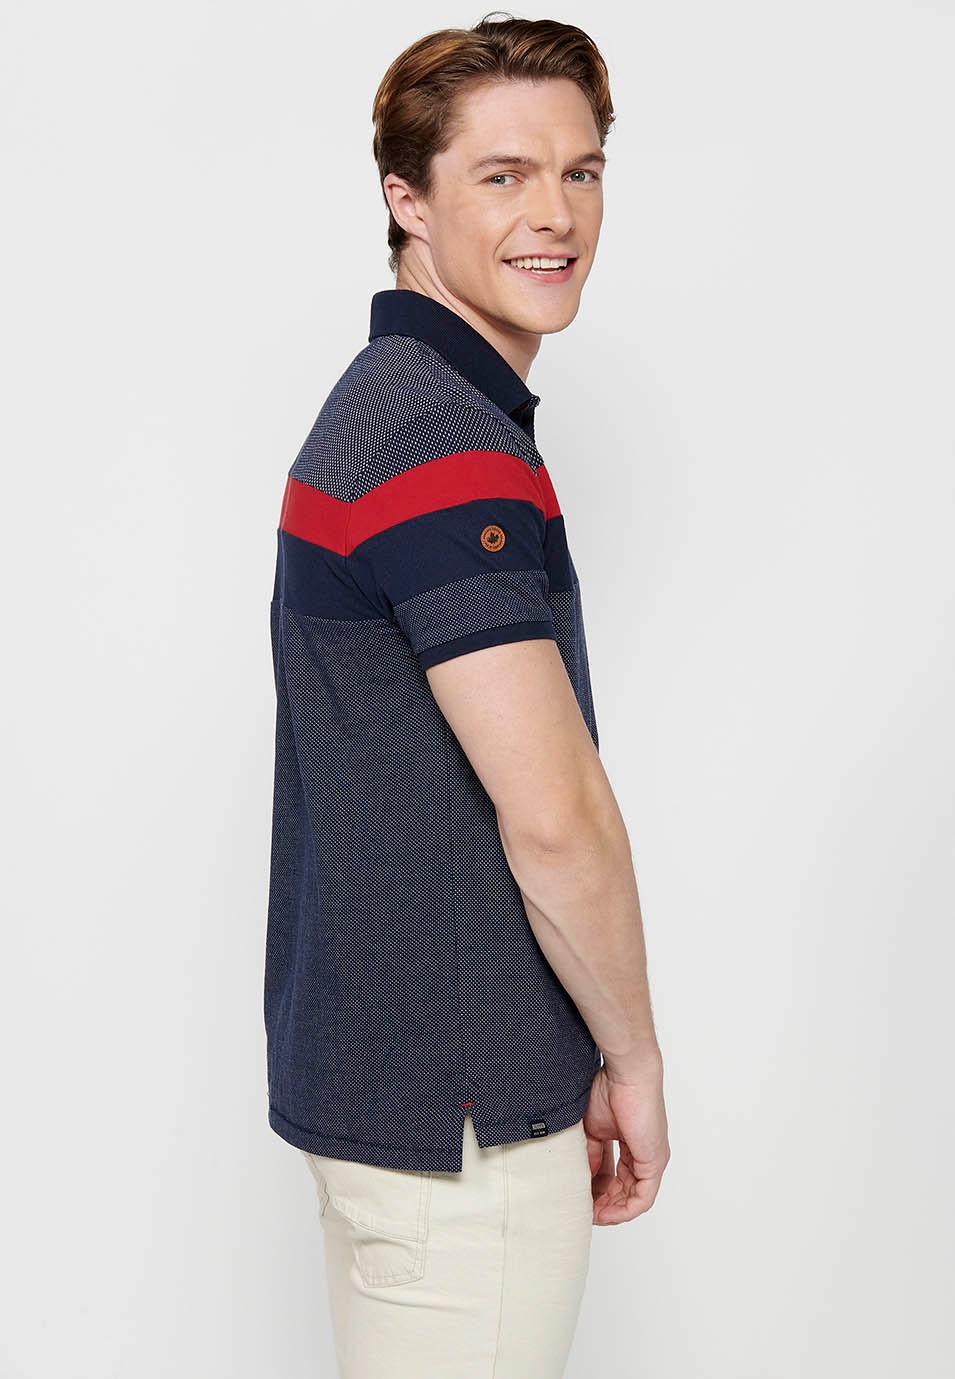 Short-sleeved polo shirt, with stripes in two colors, black and red for men